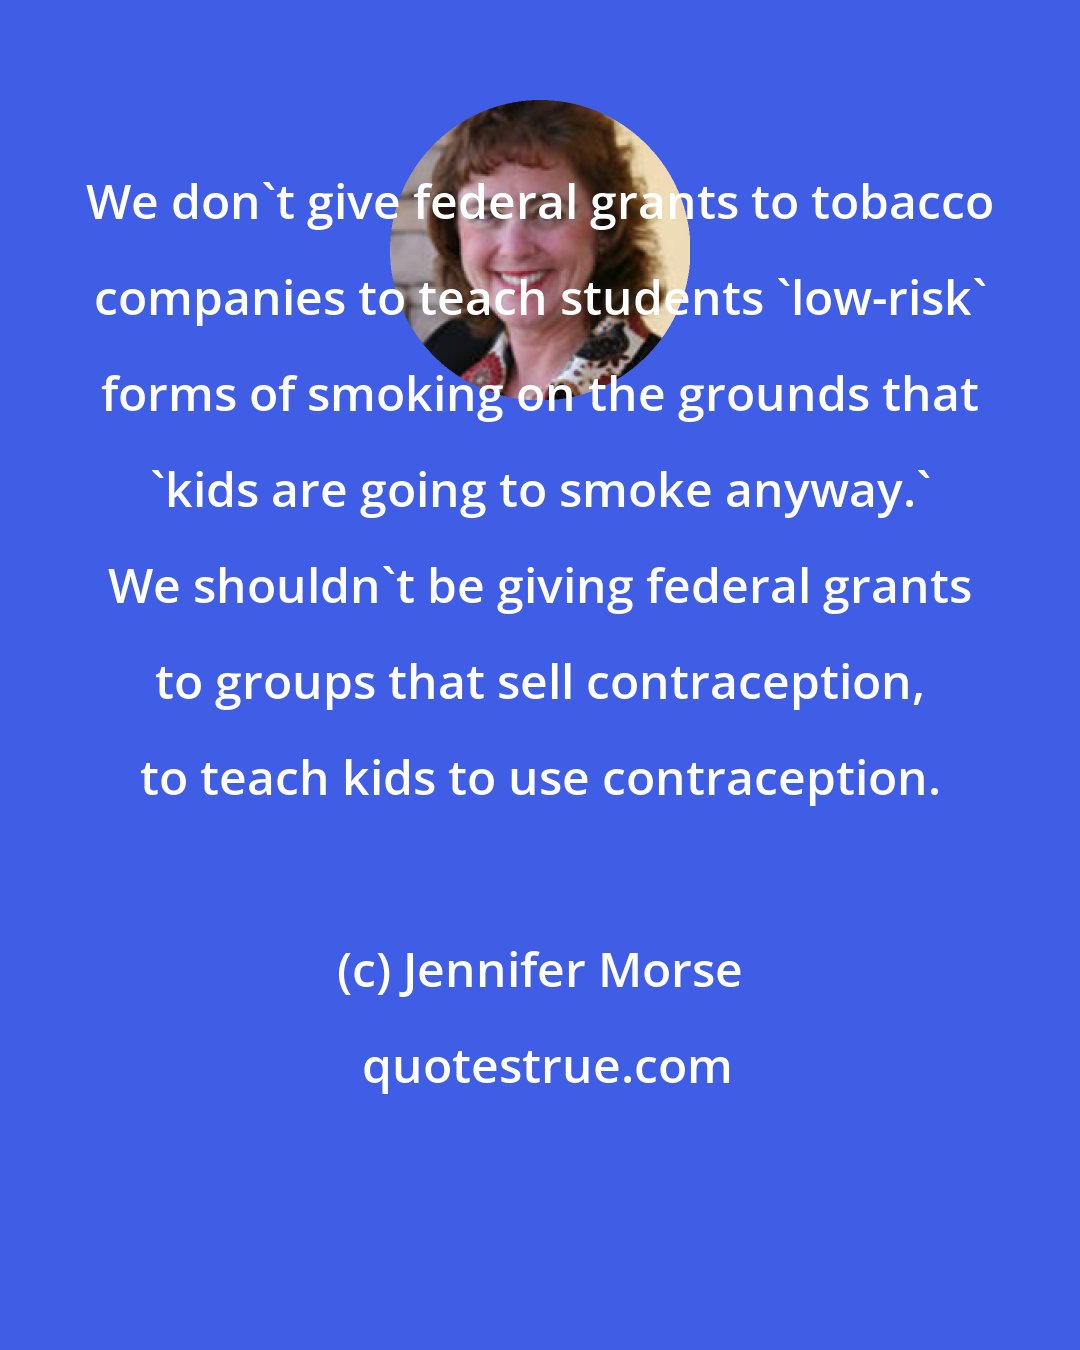 Jennifer Morse: We don't give federal grants to tobacco companies to teach students 'low-risk' forms of smoking on the grounds that 'kids are going to smoke anyway.' We shouldn't be giving federal grants to groups that sell contraception, to teach kids to use contraception.